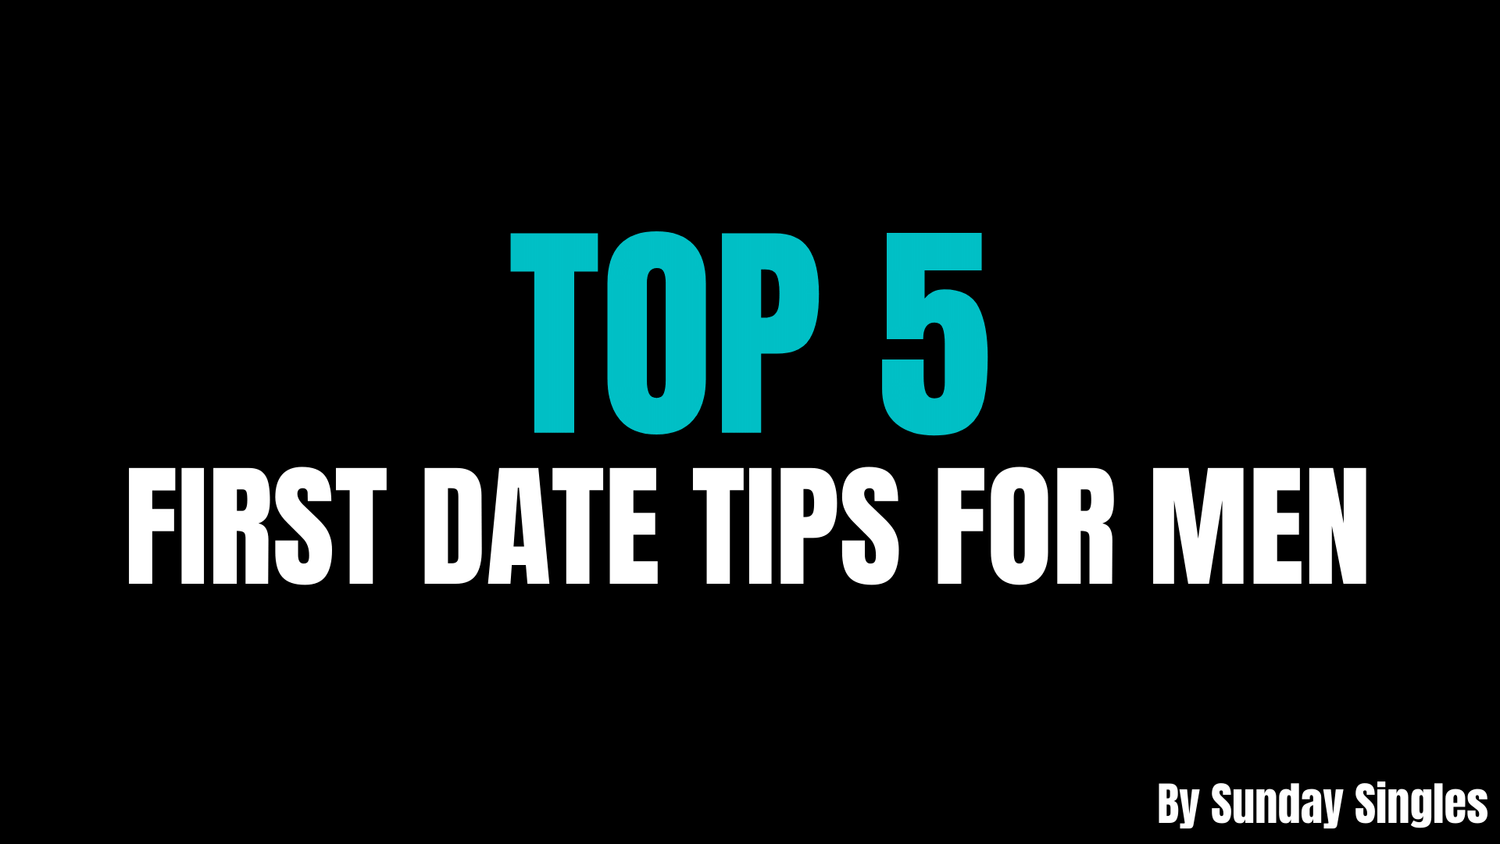 First Dates - Top 5 Tips For Men